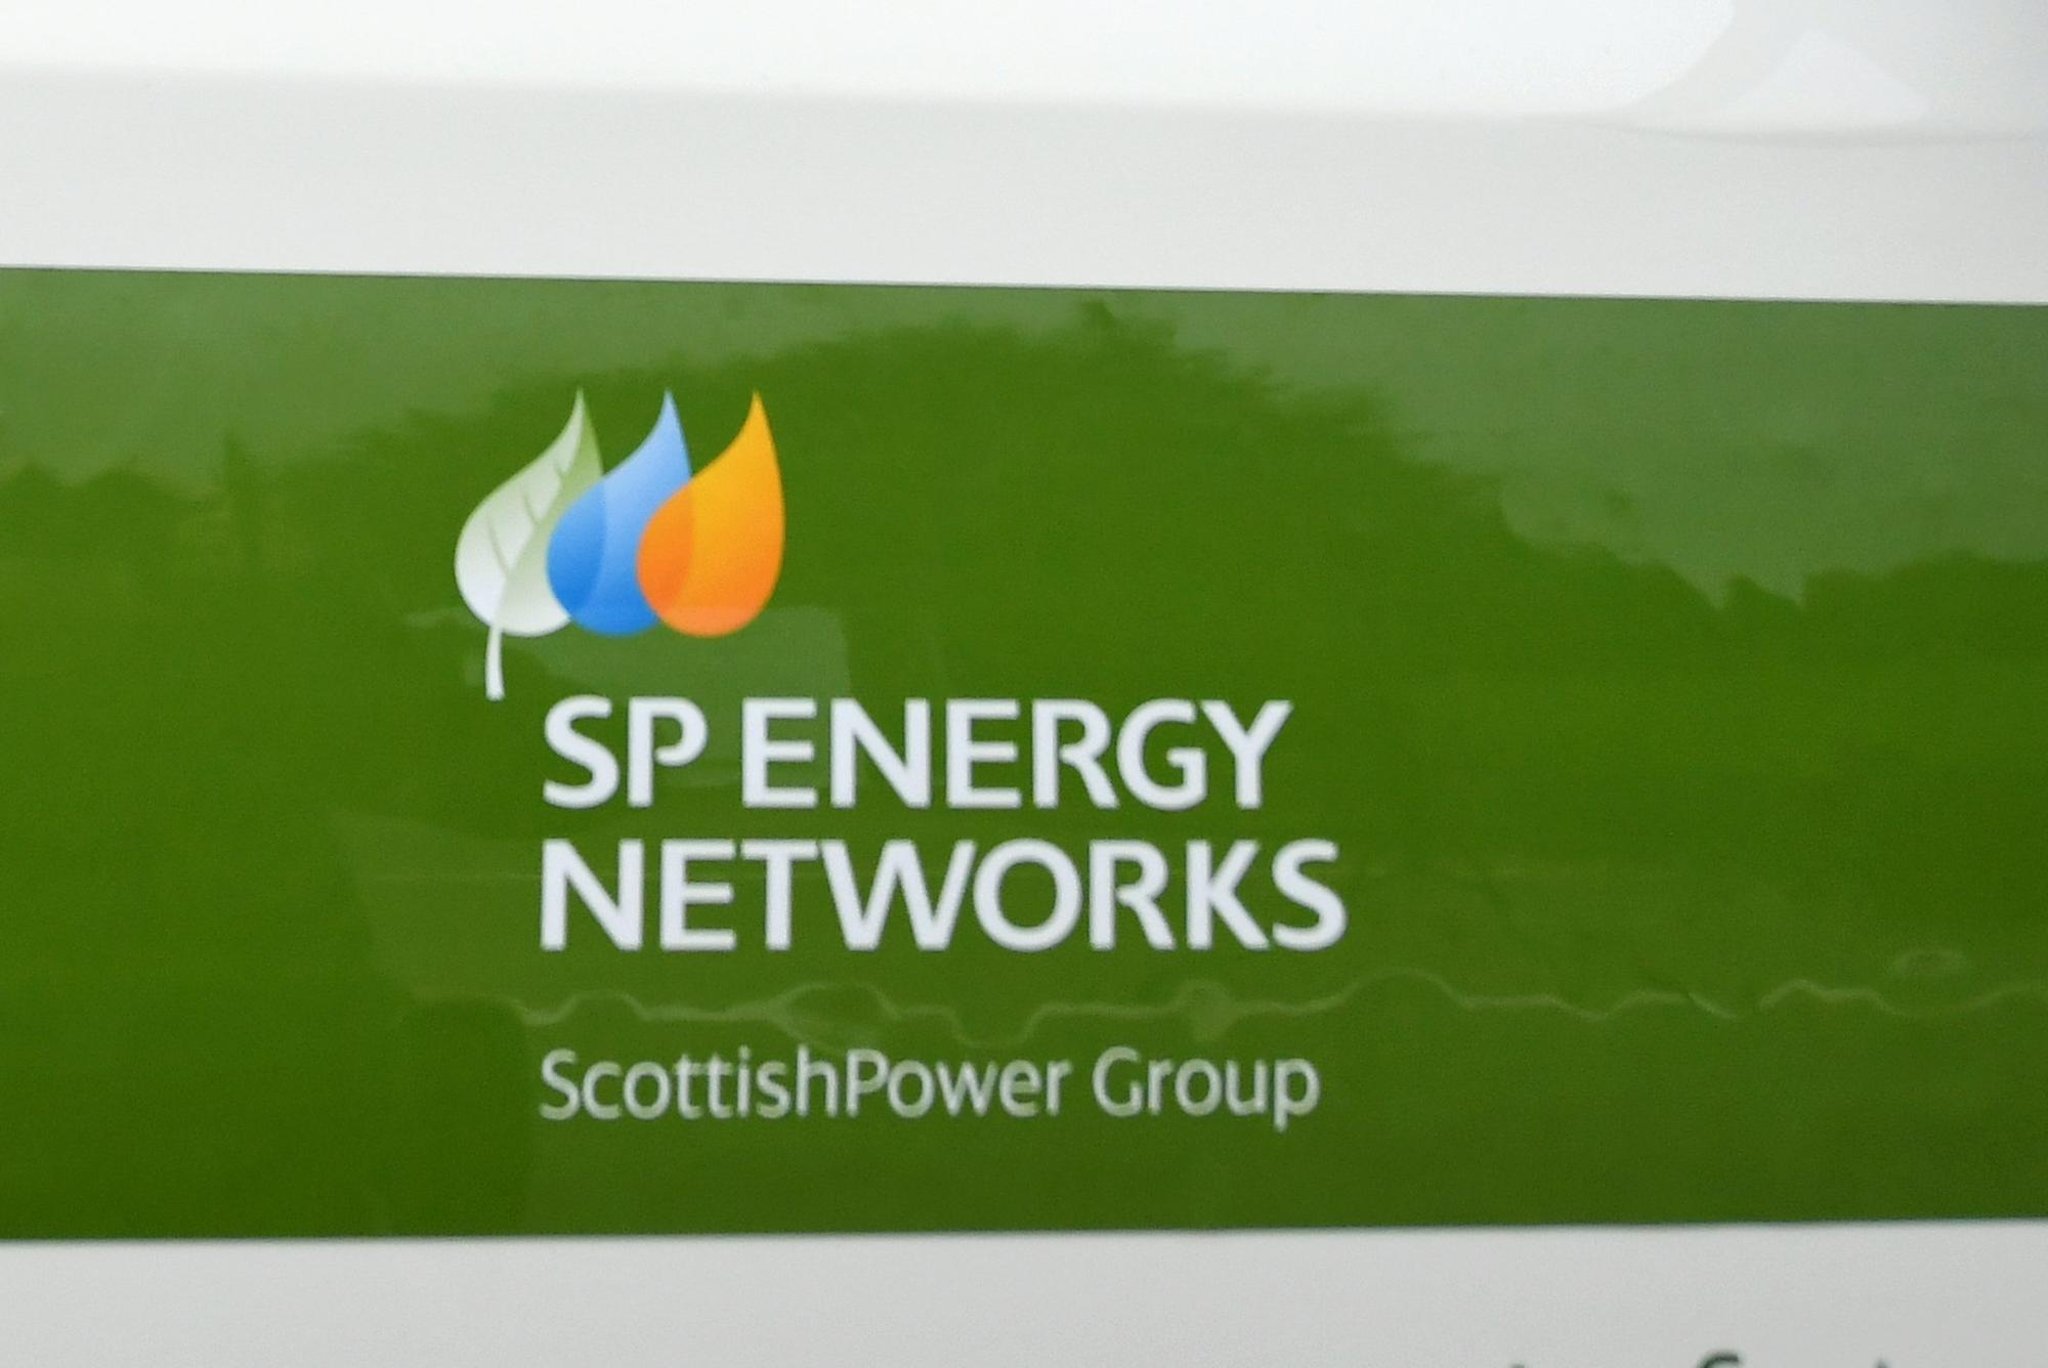 SP ENERGY NETWORKS TO UPGRADE NETWORK INFRASTRUCTURE IN WHITBURN